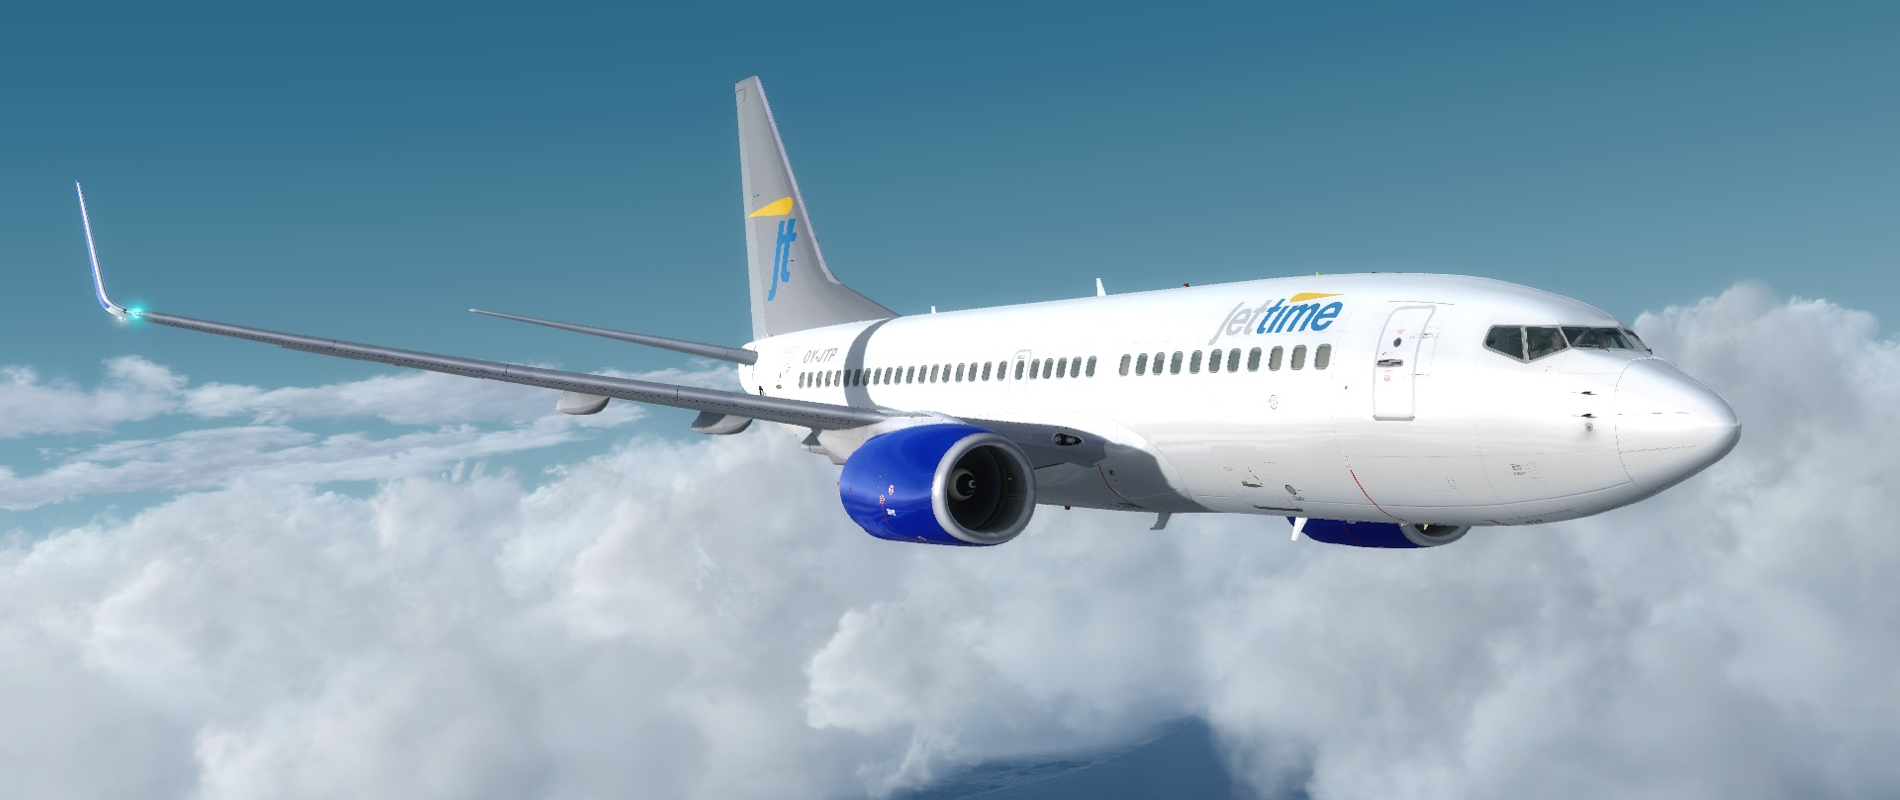 Jettime New Livery for PMDG 737